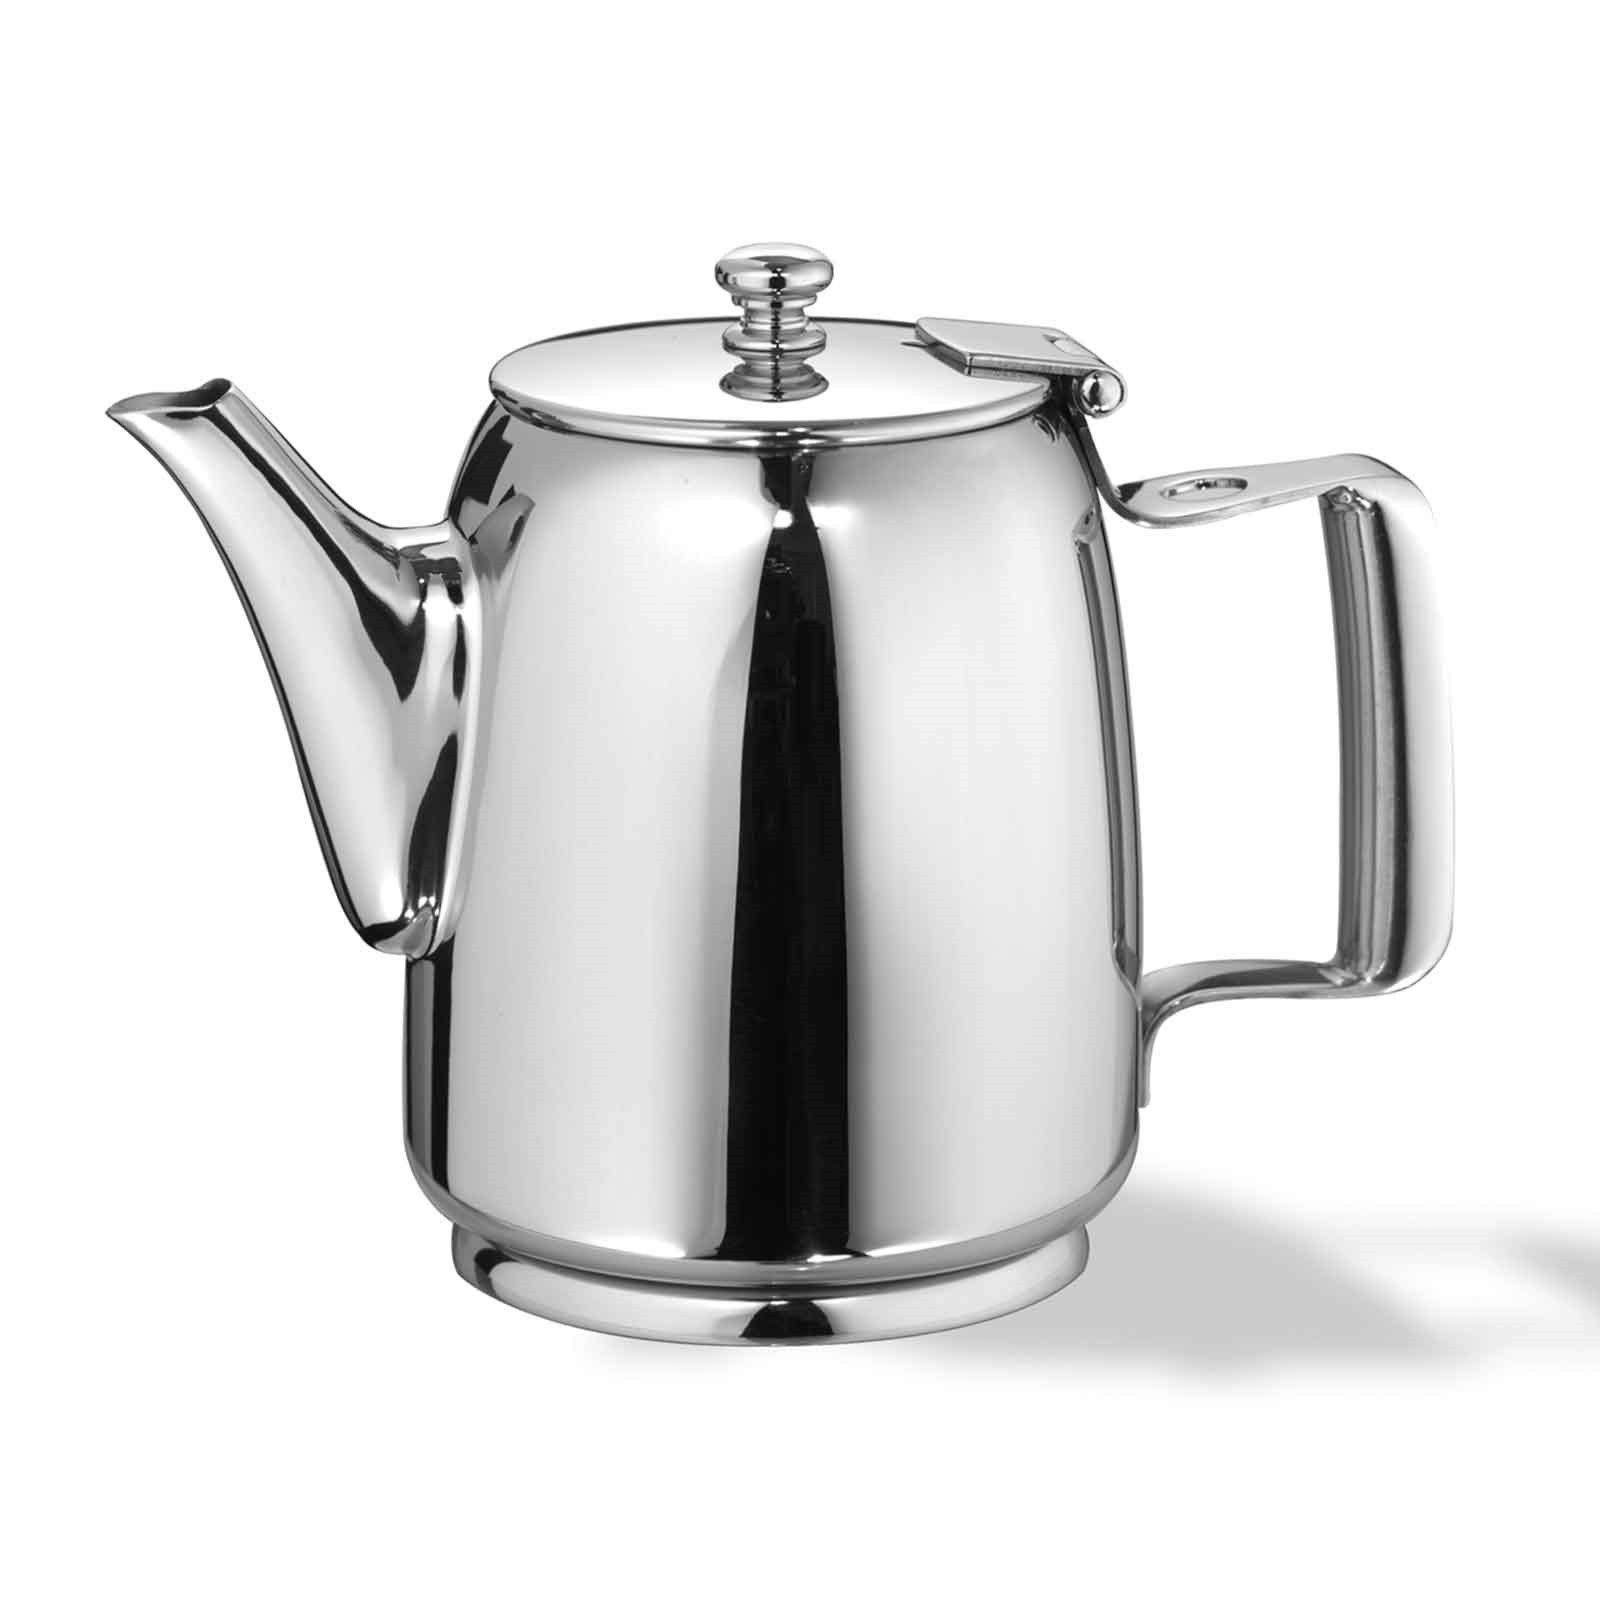 Welware plastic insulated thermal teapot